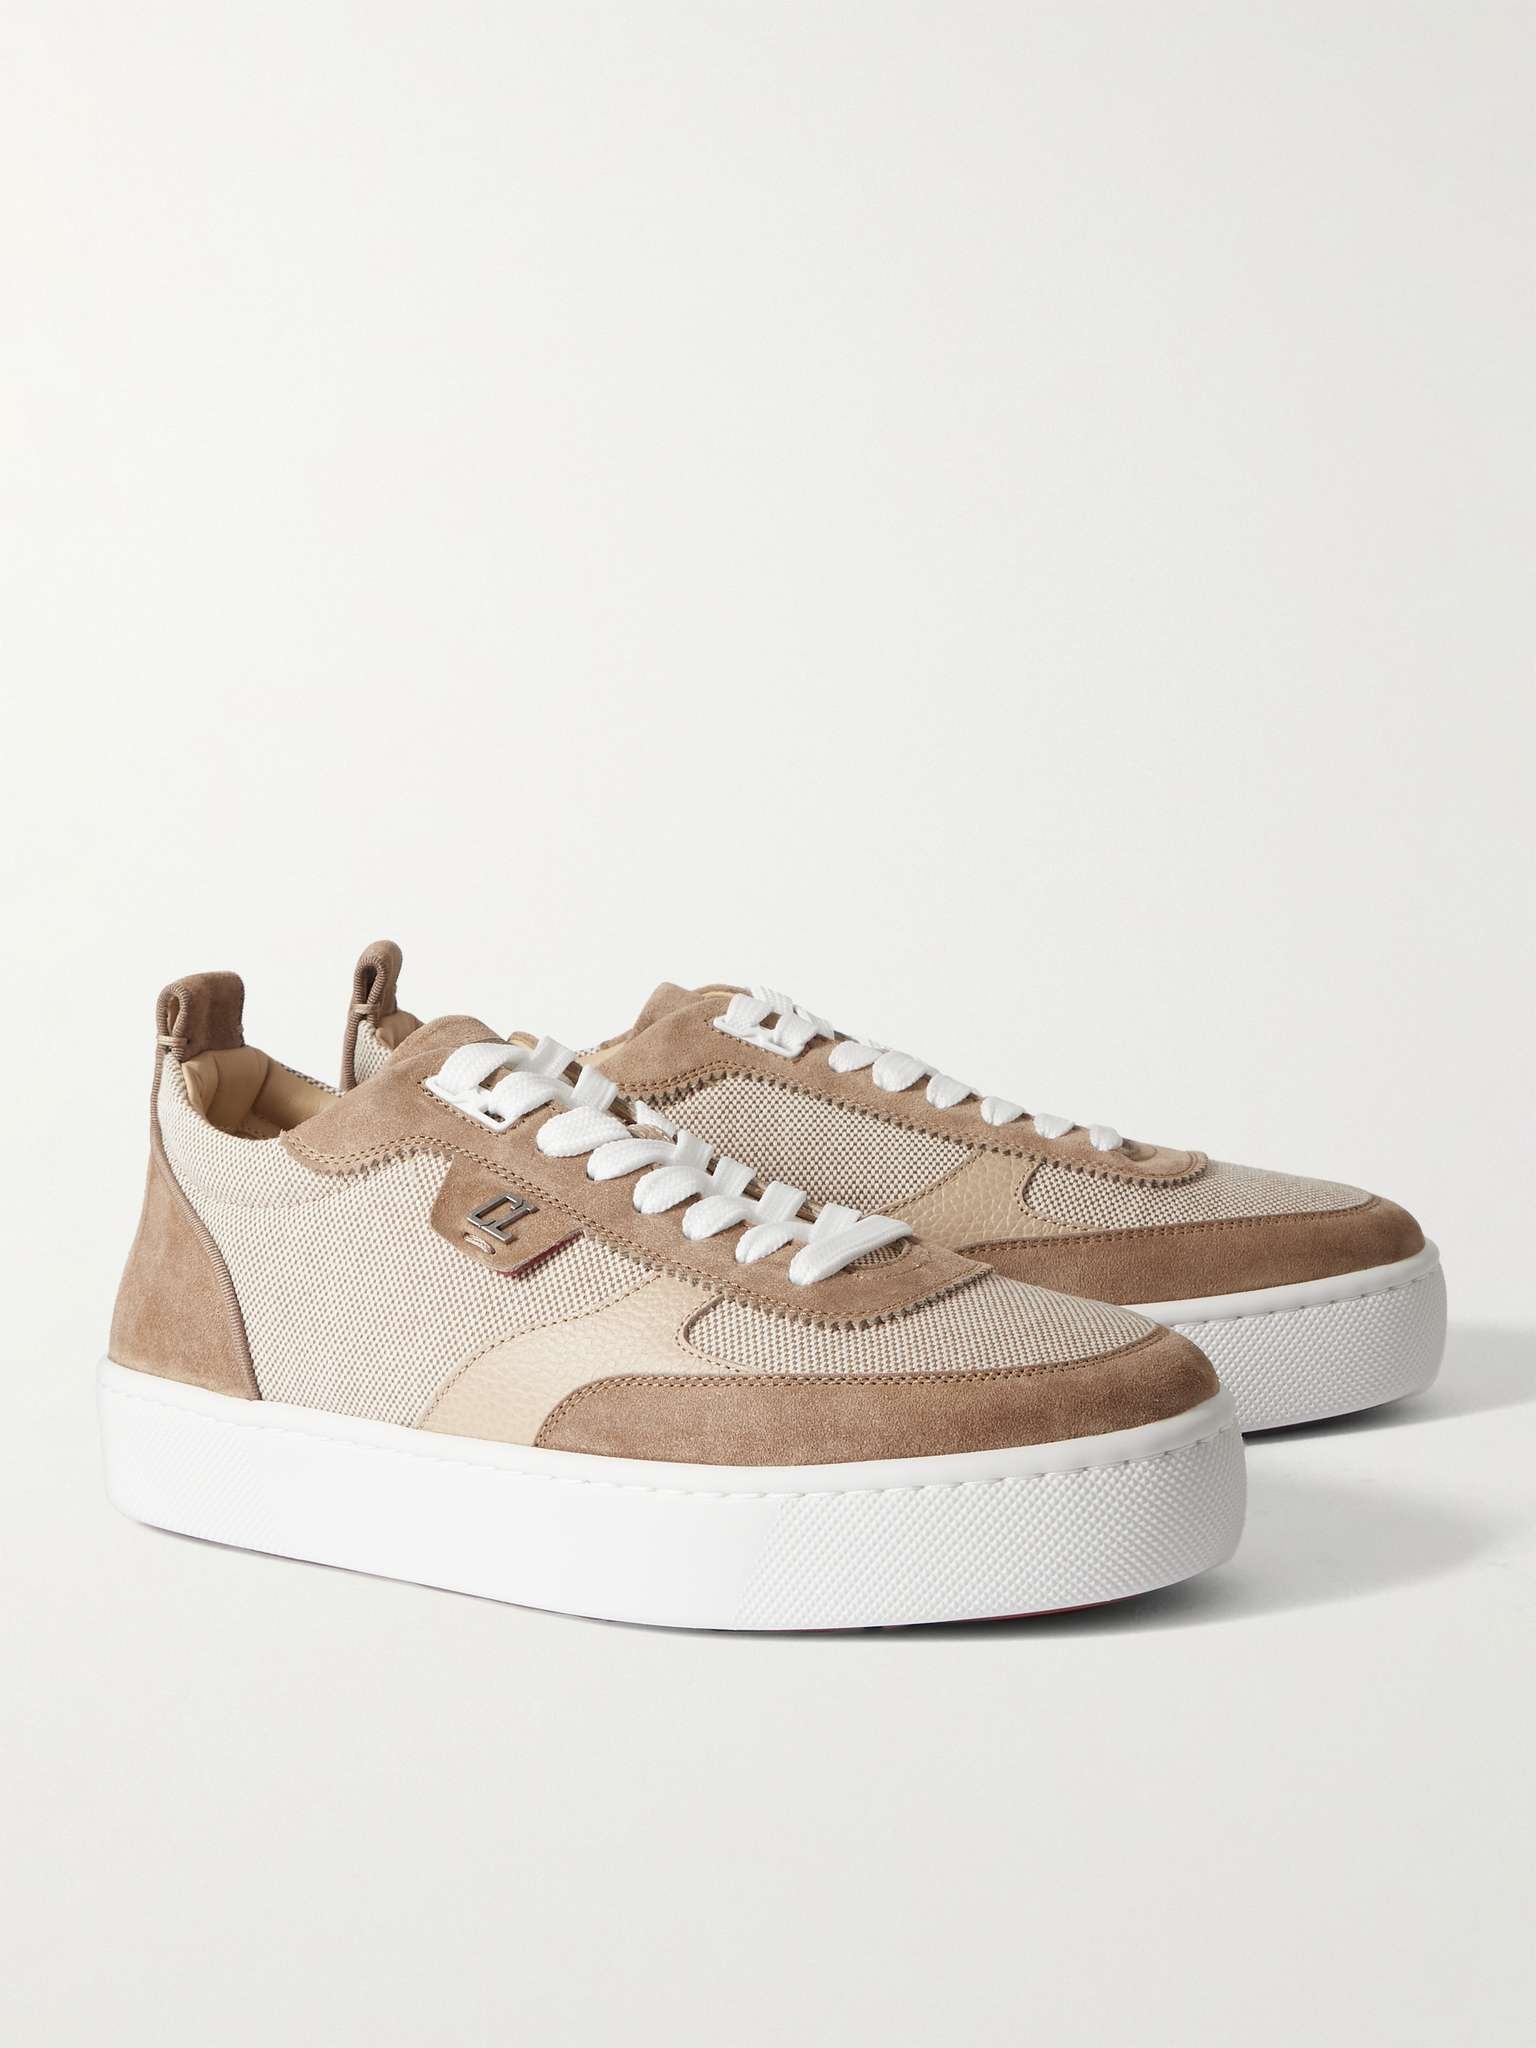 Happyrui Spiked Leather-Trimmed Canvas and Suede Sneakers - 4